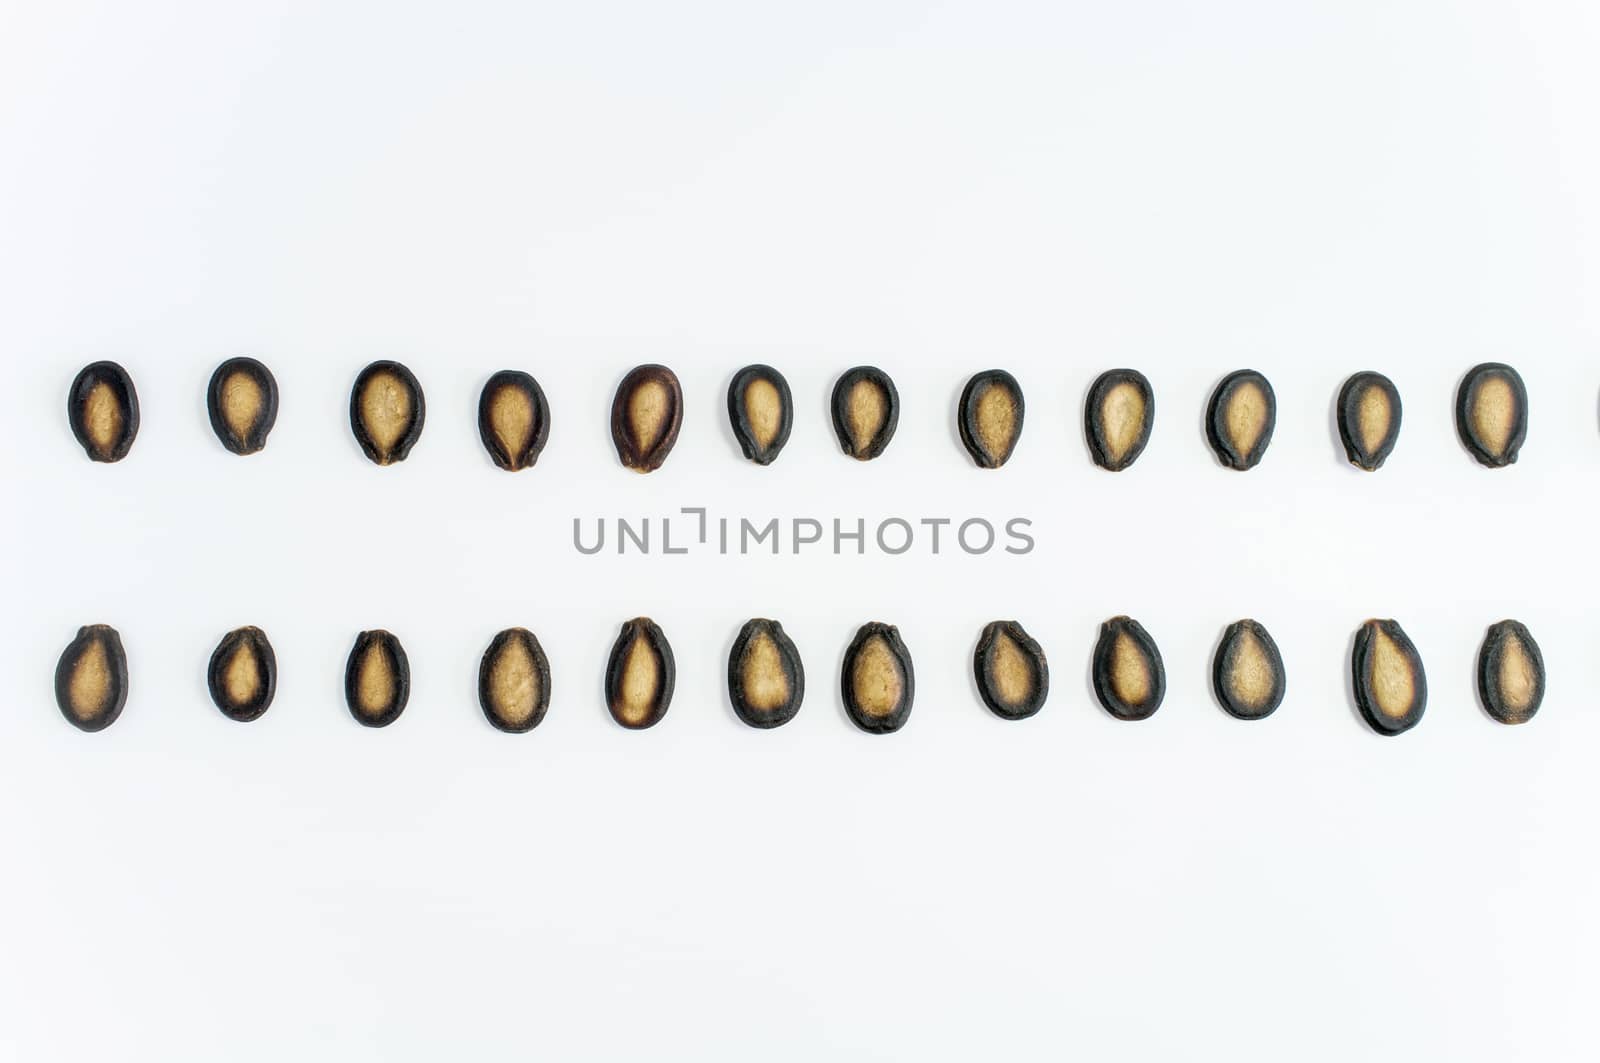 Watermelon seeds on white background by koson